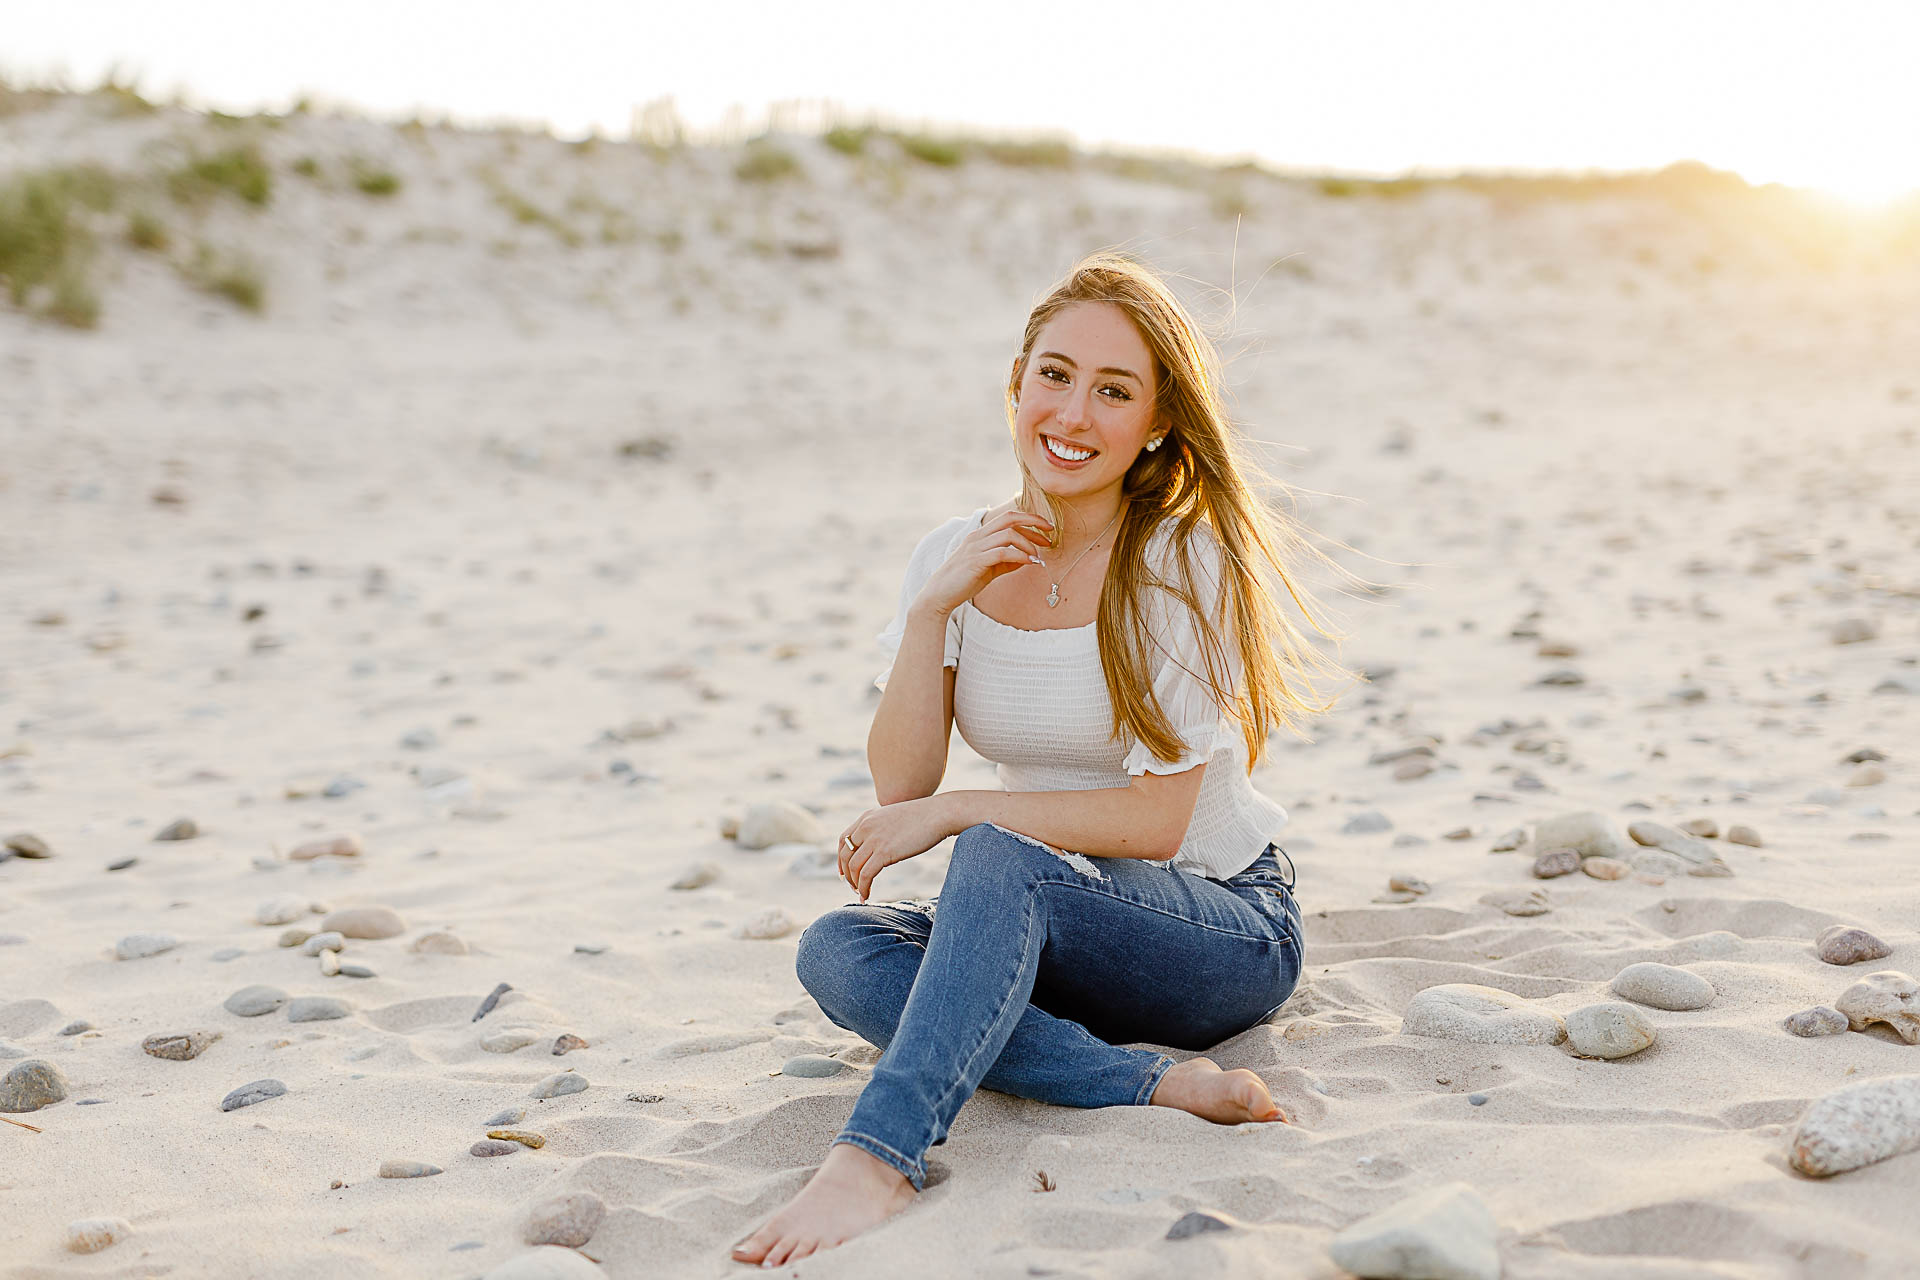 Photo by Scituate senior portrait photographer Christina Runnals | Girl sitting in the sand